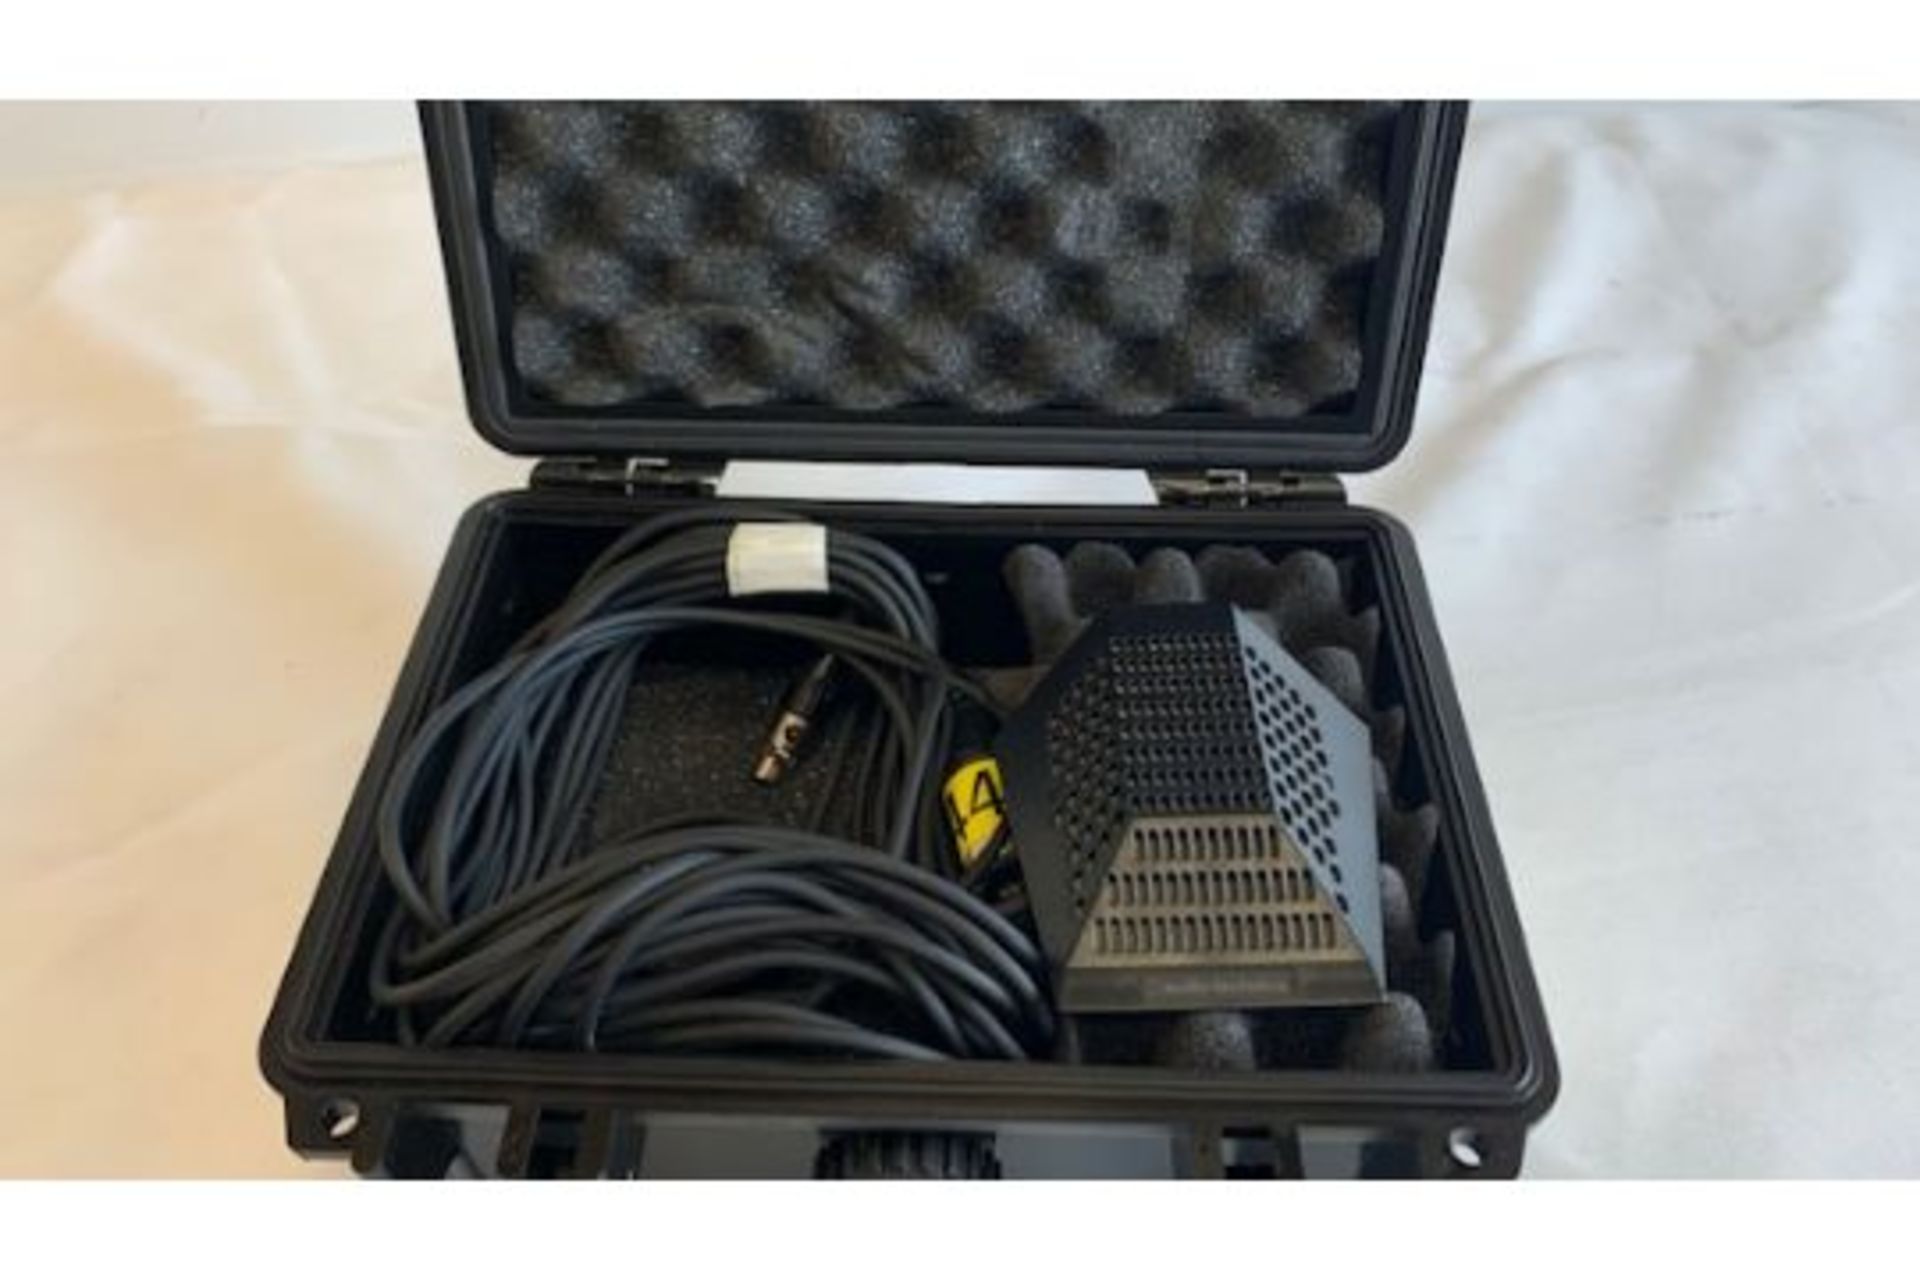 1 x AudioTechnica PRO 44 Boundary Mic including a cable in Mantona plastic case - Ref: 1222 -